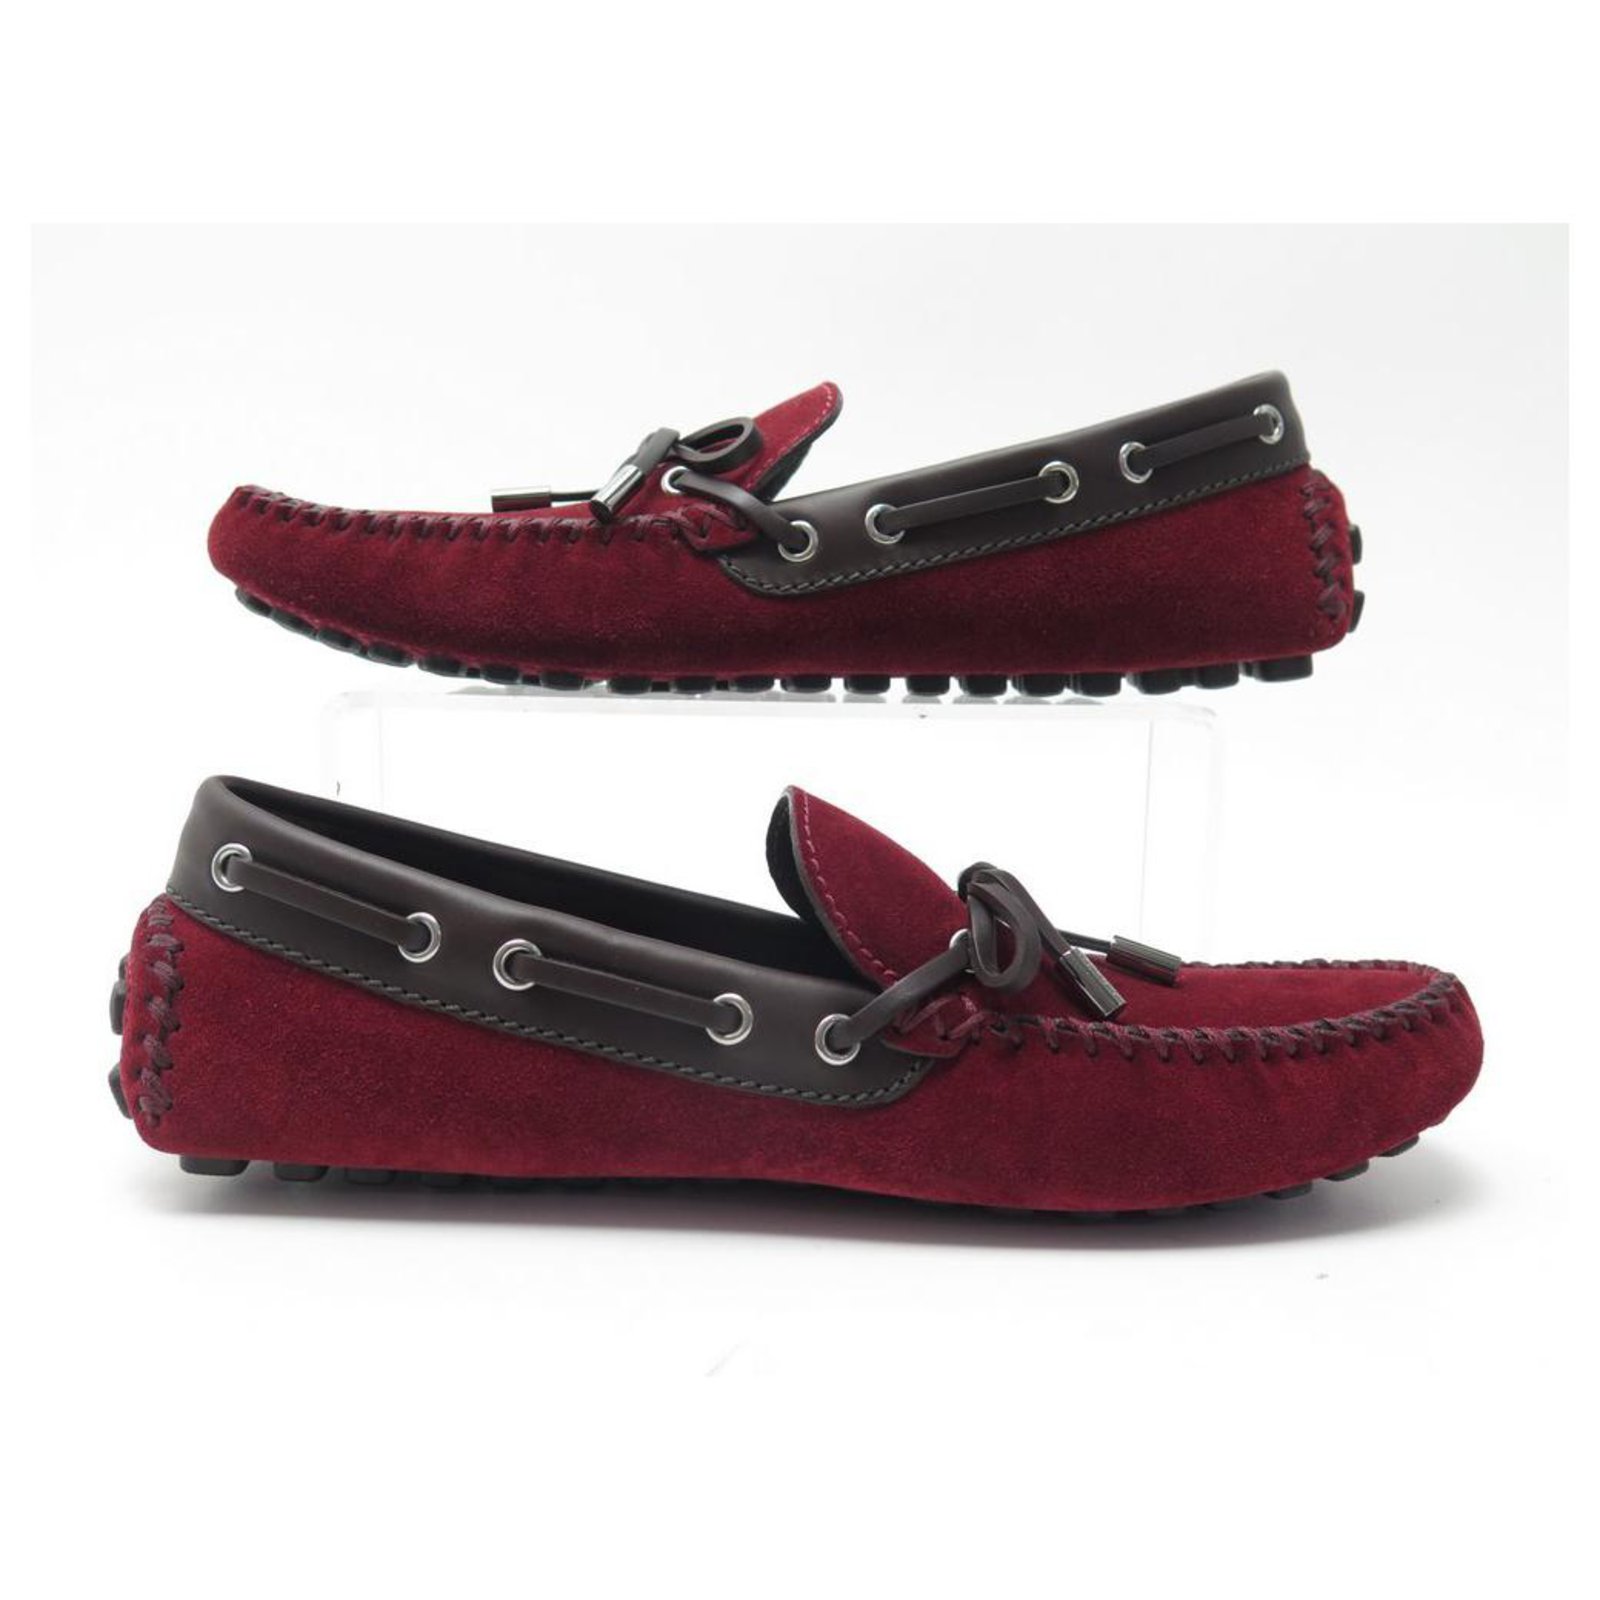 Louis Vuitton Arizona driving moccasin suede 7.5 LV or 8.5 US 41.5 EUR  ND0124 *